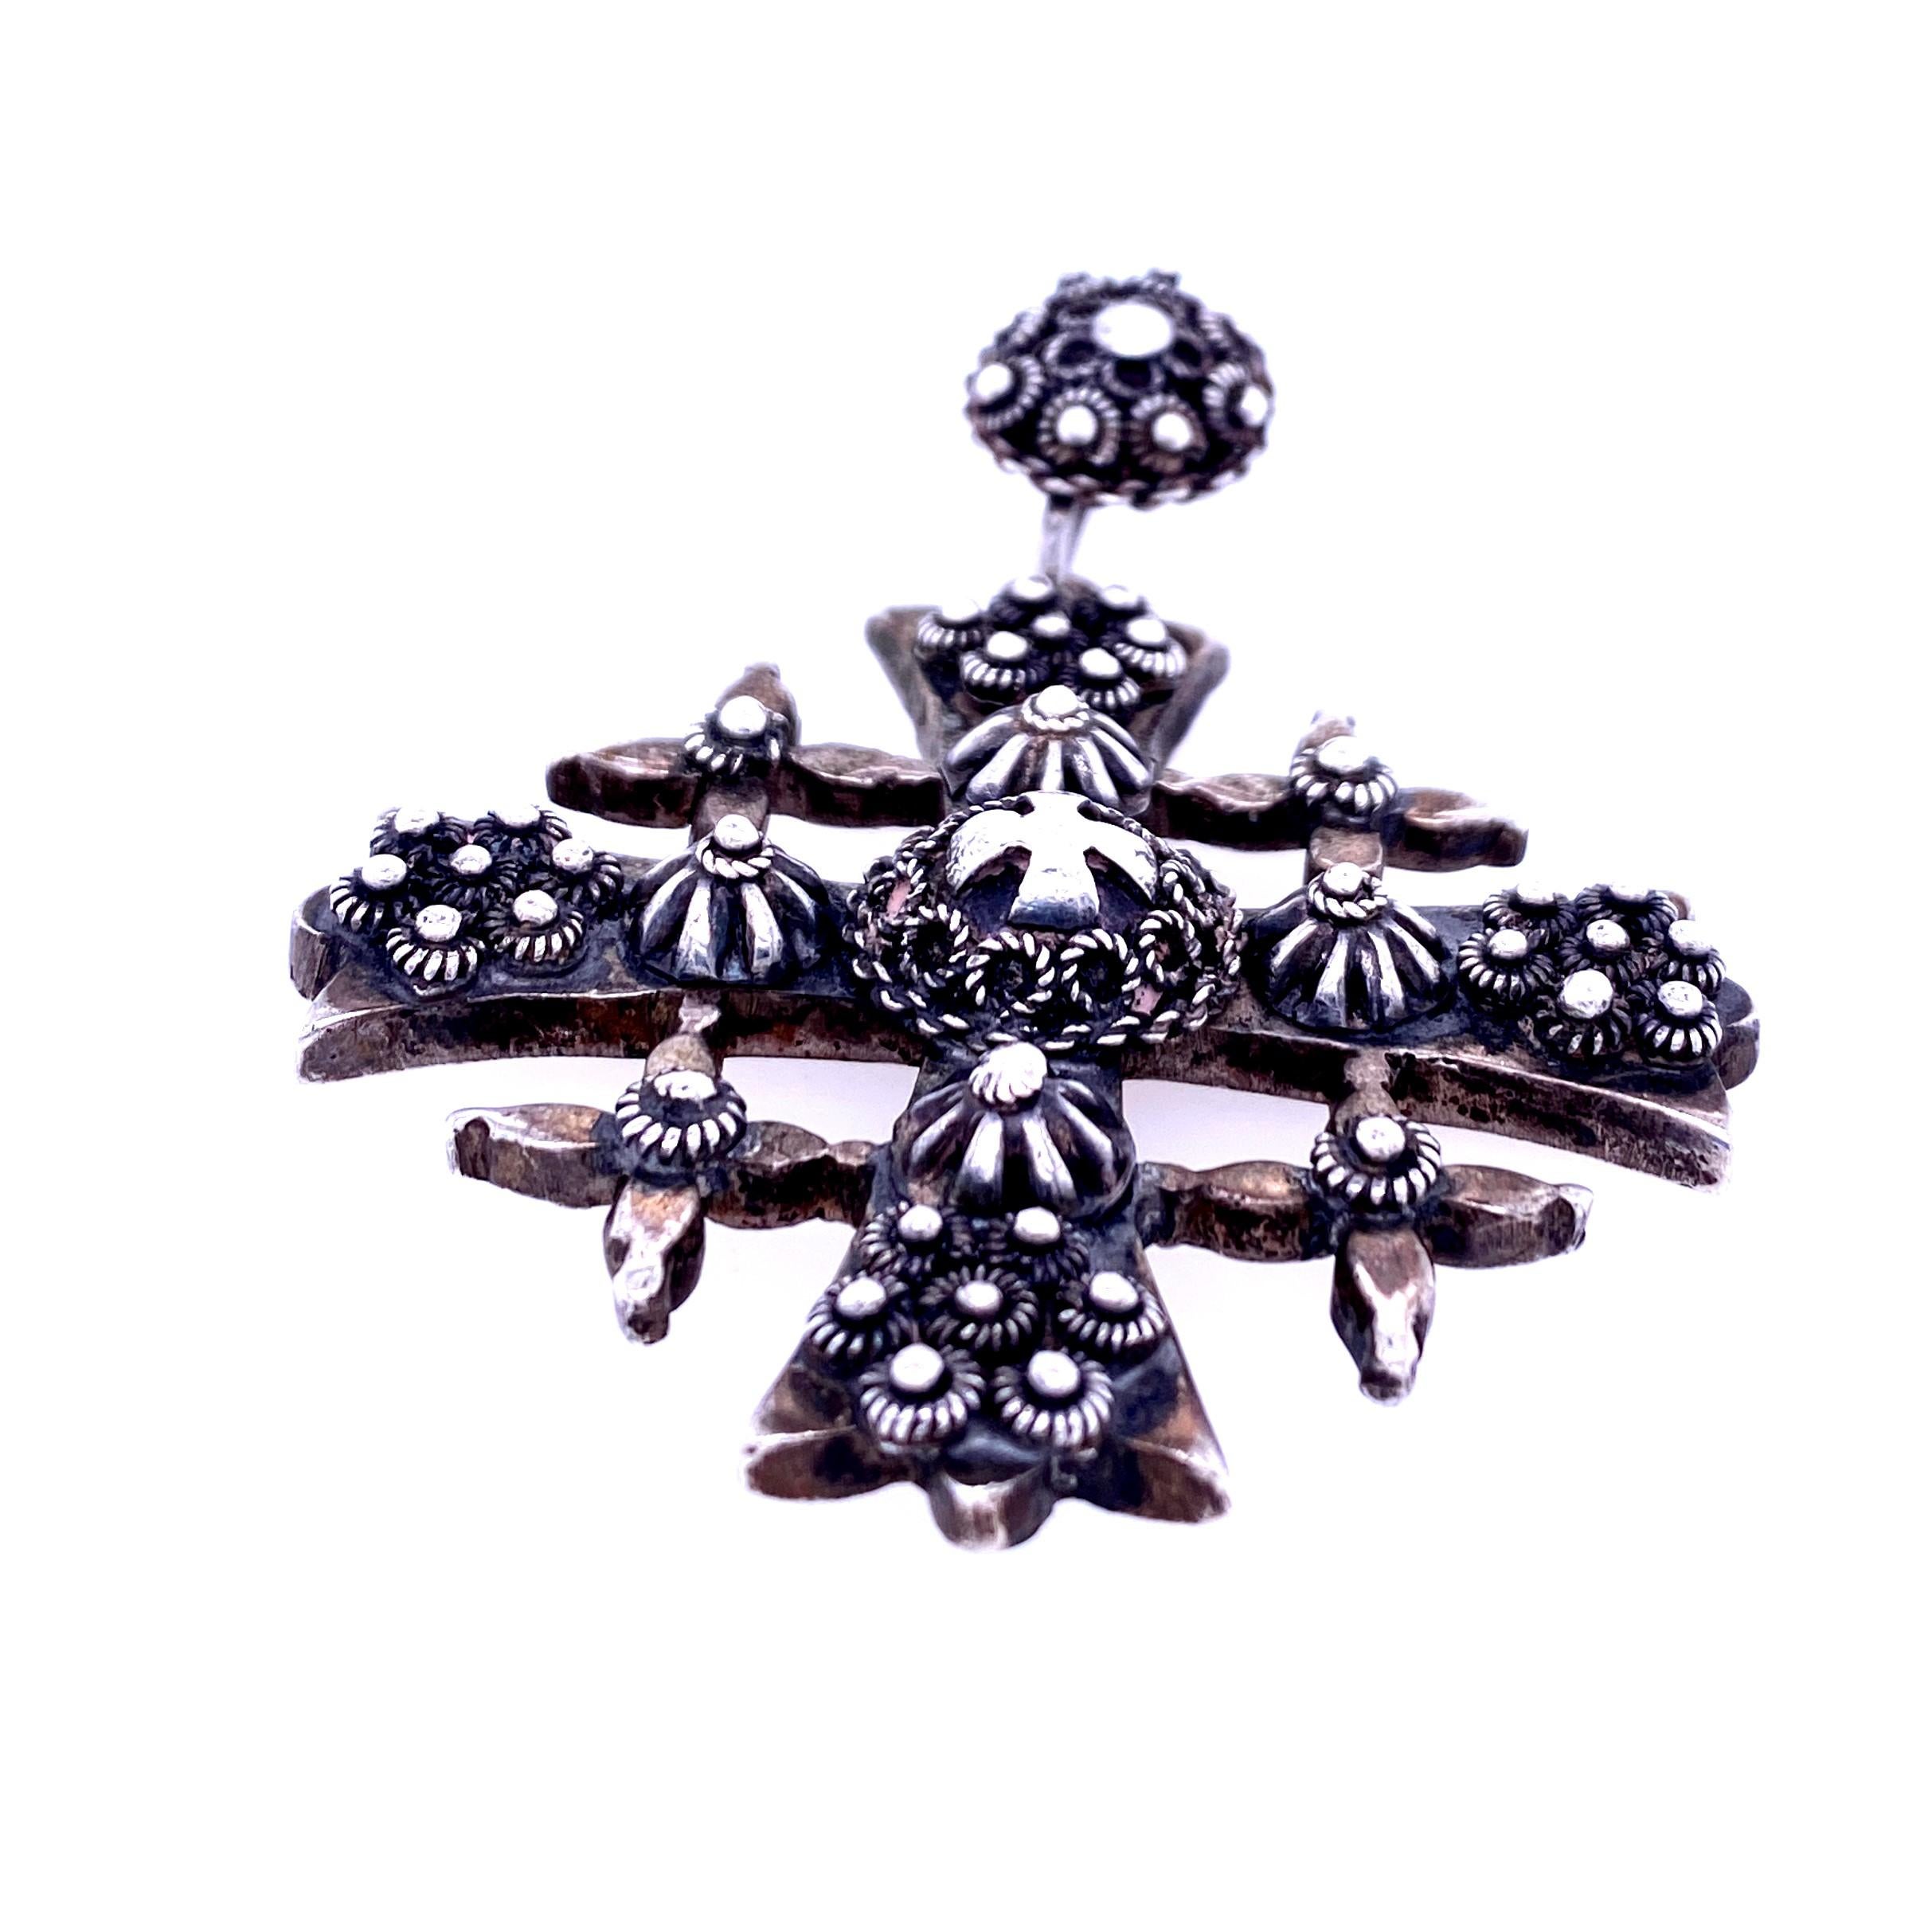 One sterling silver (stamped JERUSALEM 925) textured cross pendant measuring 2.5 inches long with bail x 2 inches wide.  Circa 1970s.